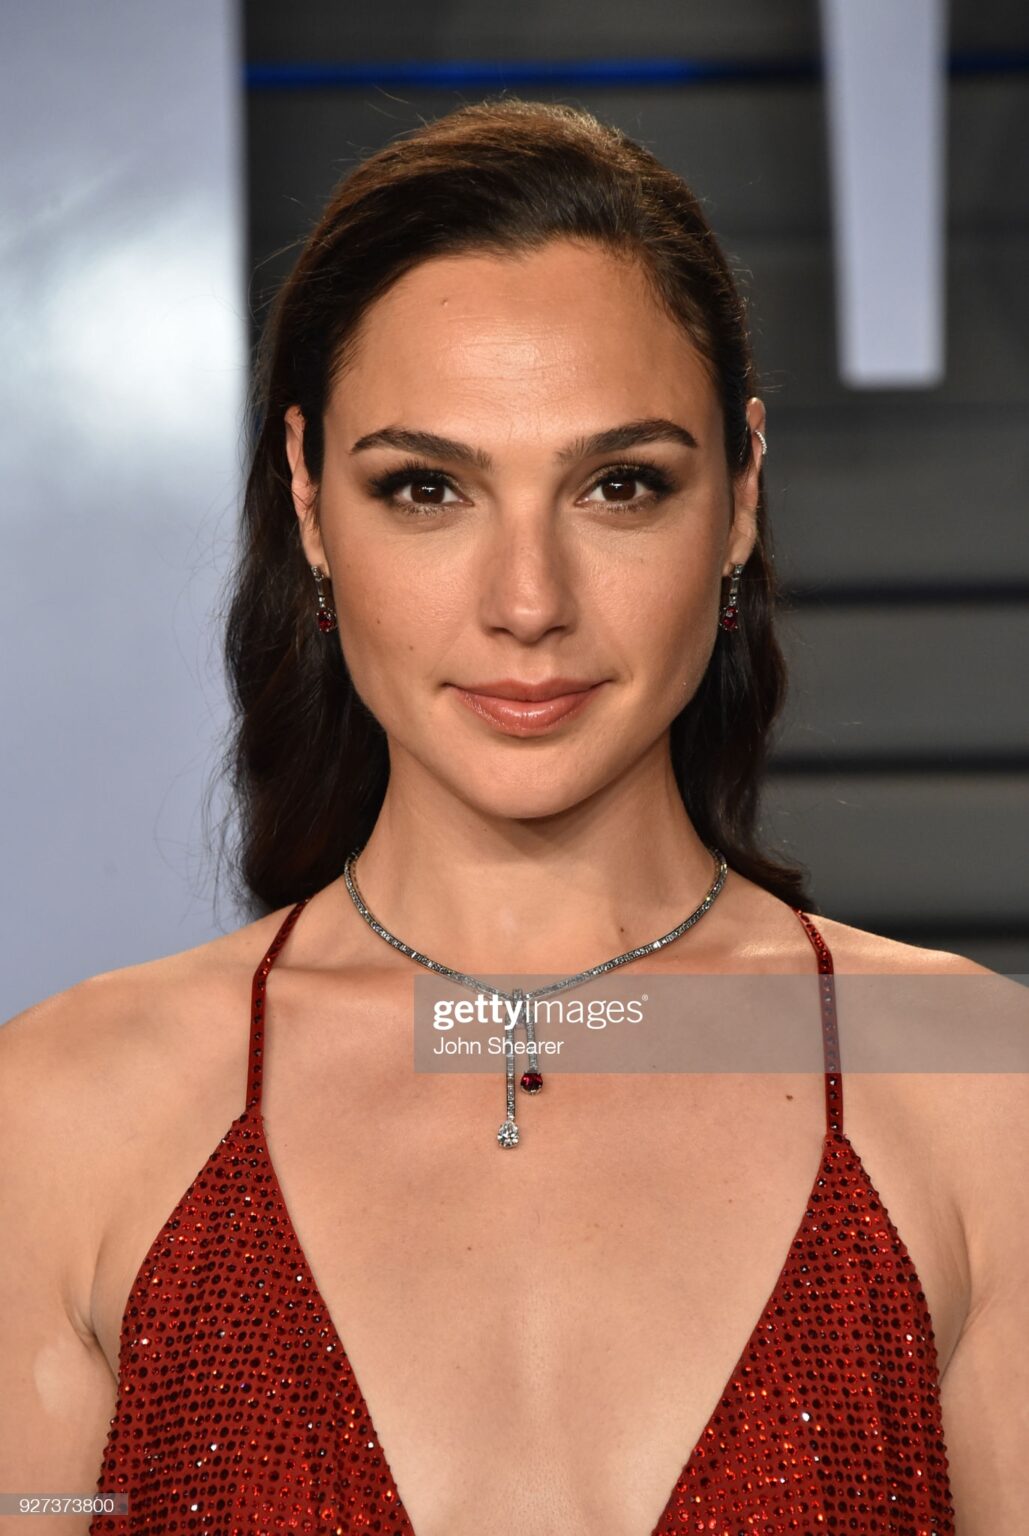 Gal Gadot Biography; Net Worth, Age, Height, Movies, Children And